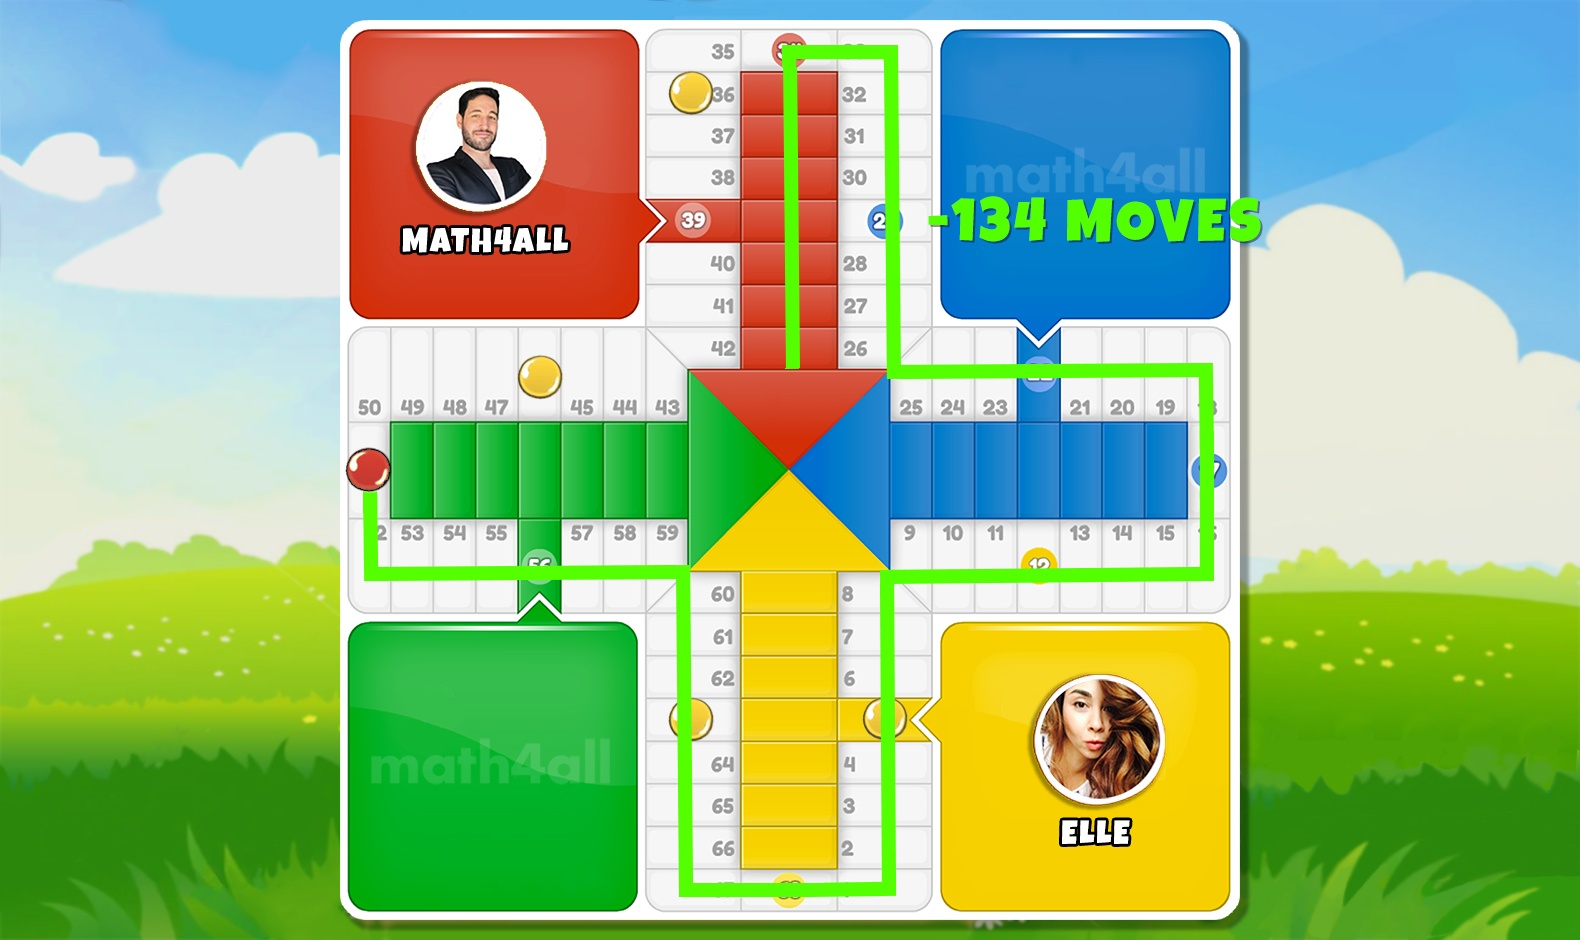 How to play Ludo & Steps to Play Ludo Online